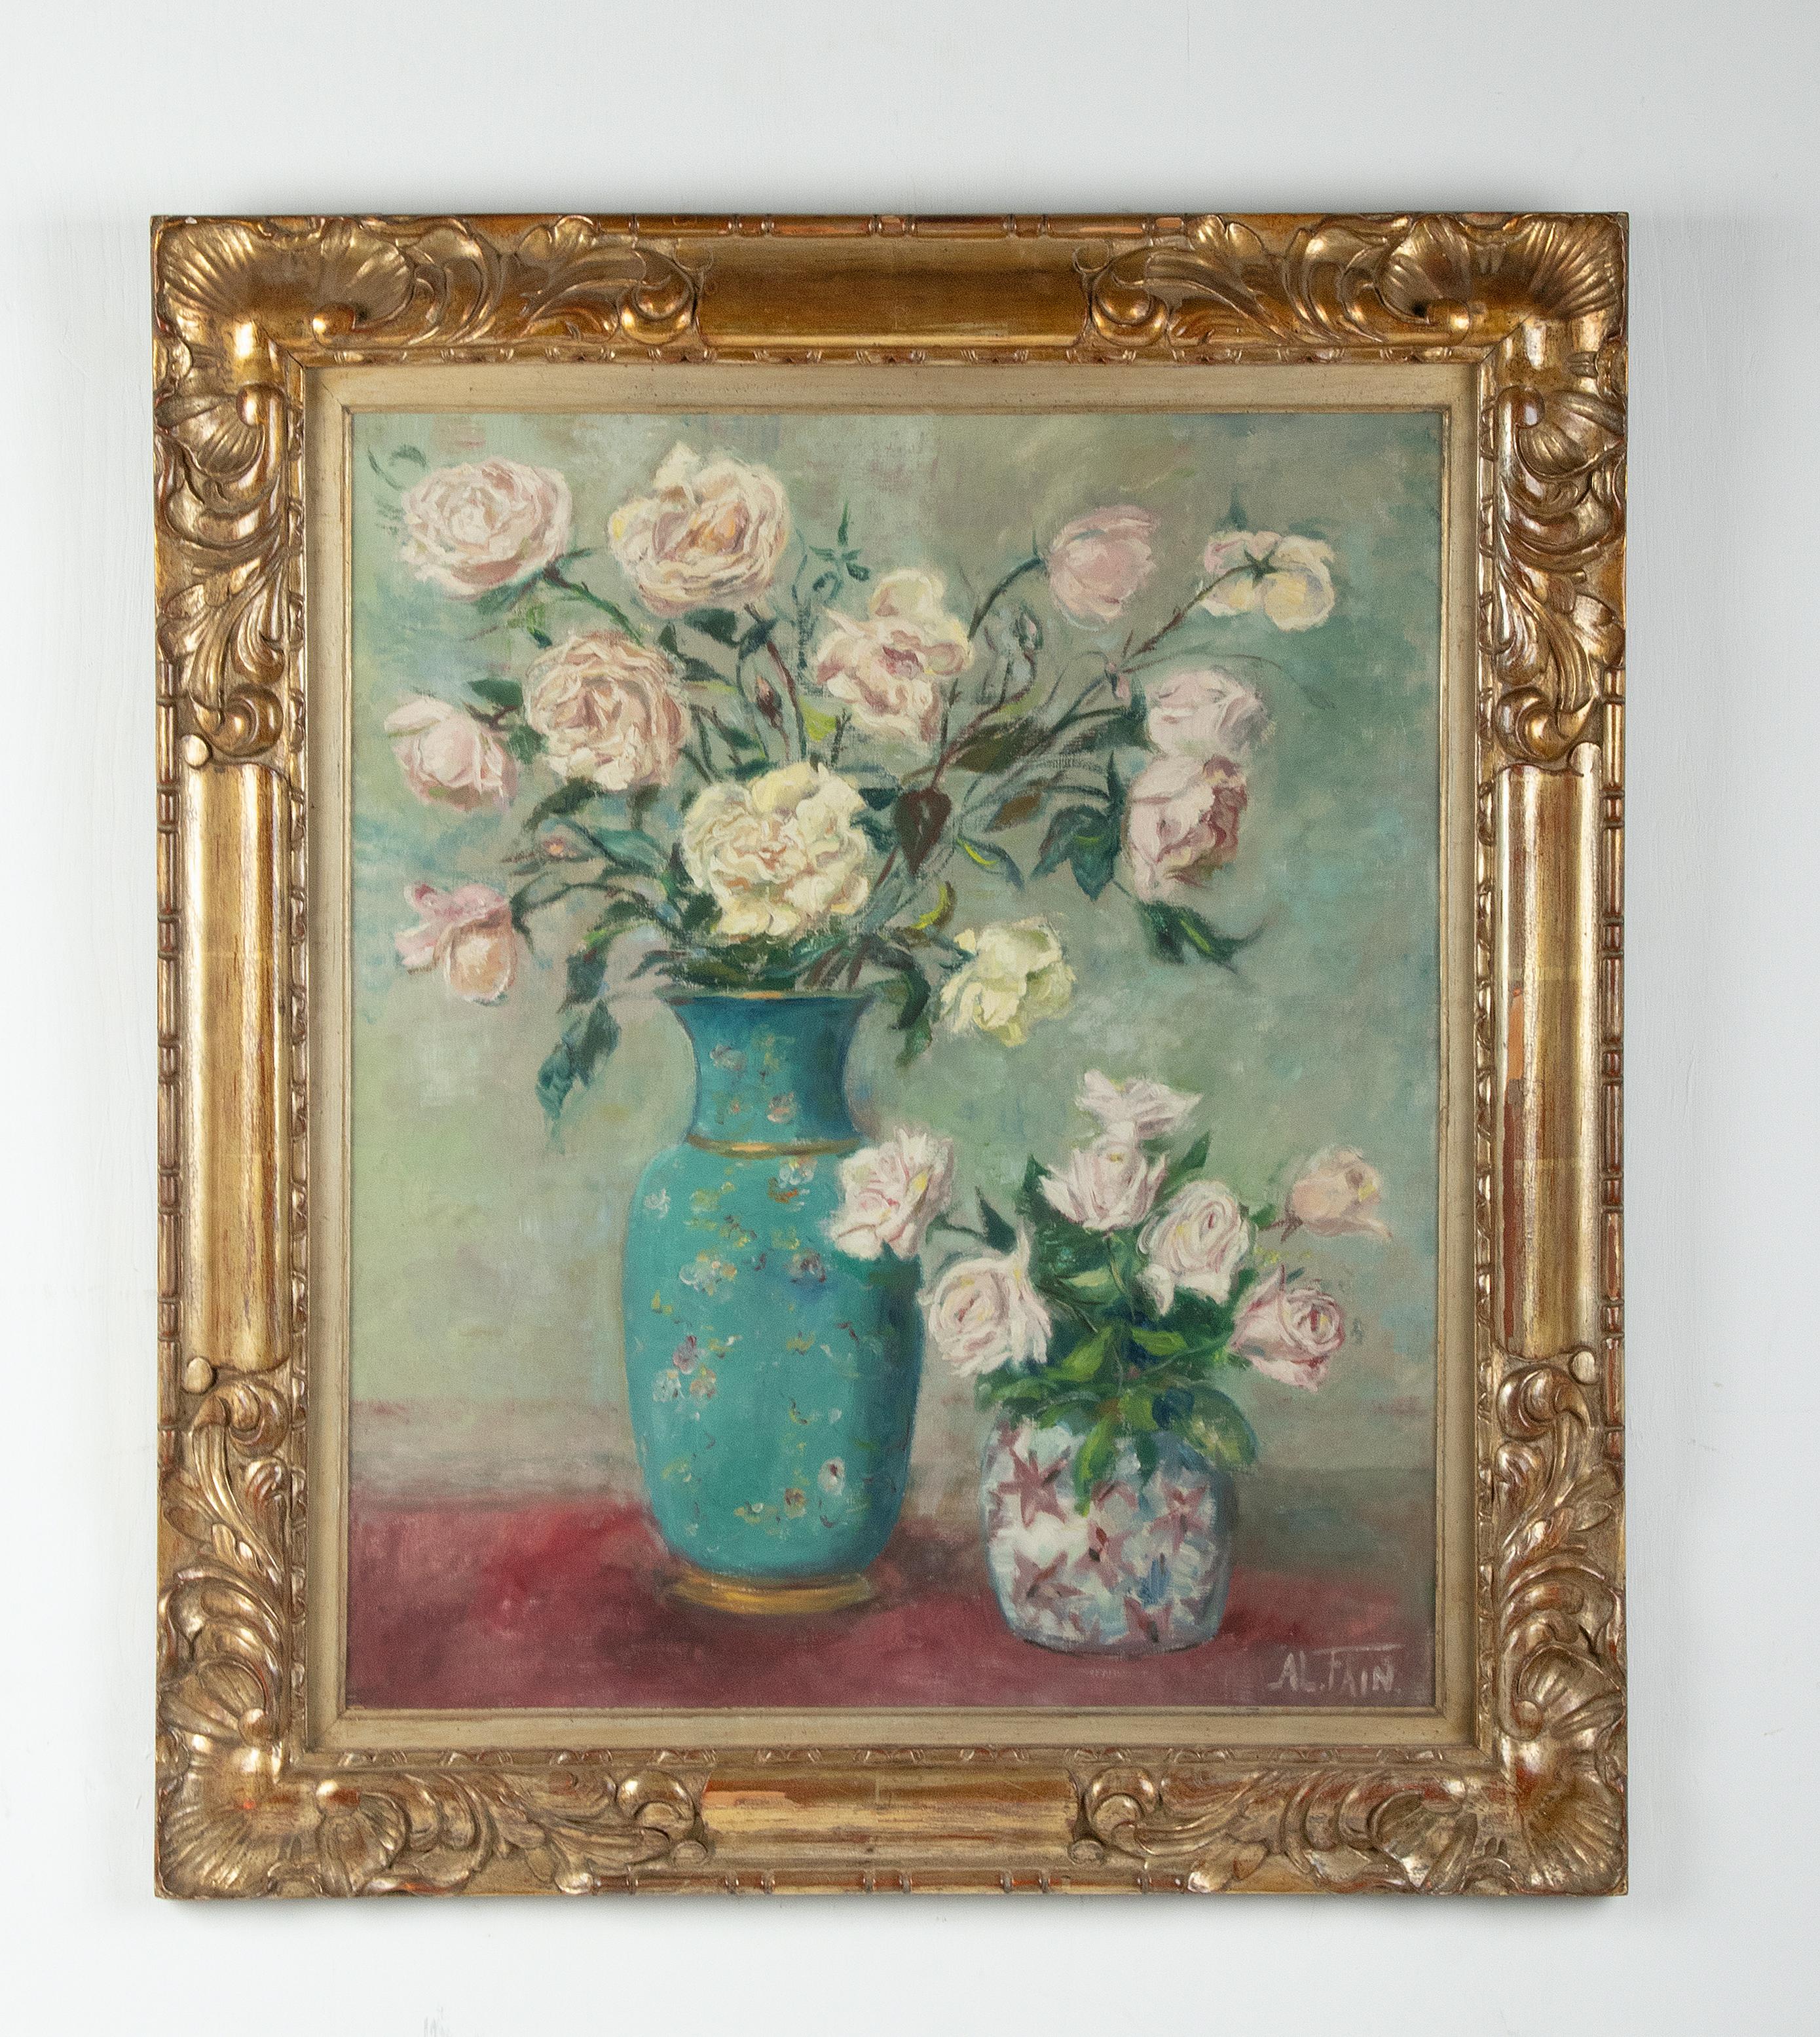 Beautiful antique flower still life, painted by the Belgian artist Alexandre Fain. The painting has beautiful color combinations with pastel shades of green and pink. This combines nicely with the original wooden gilded frame. The painting is framed